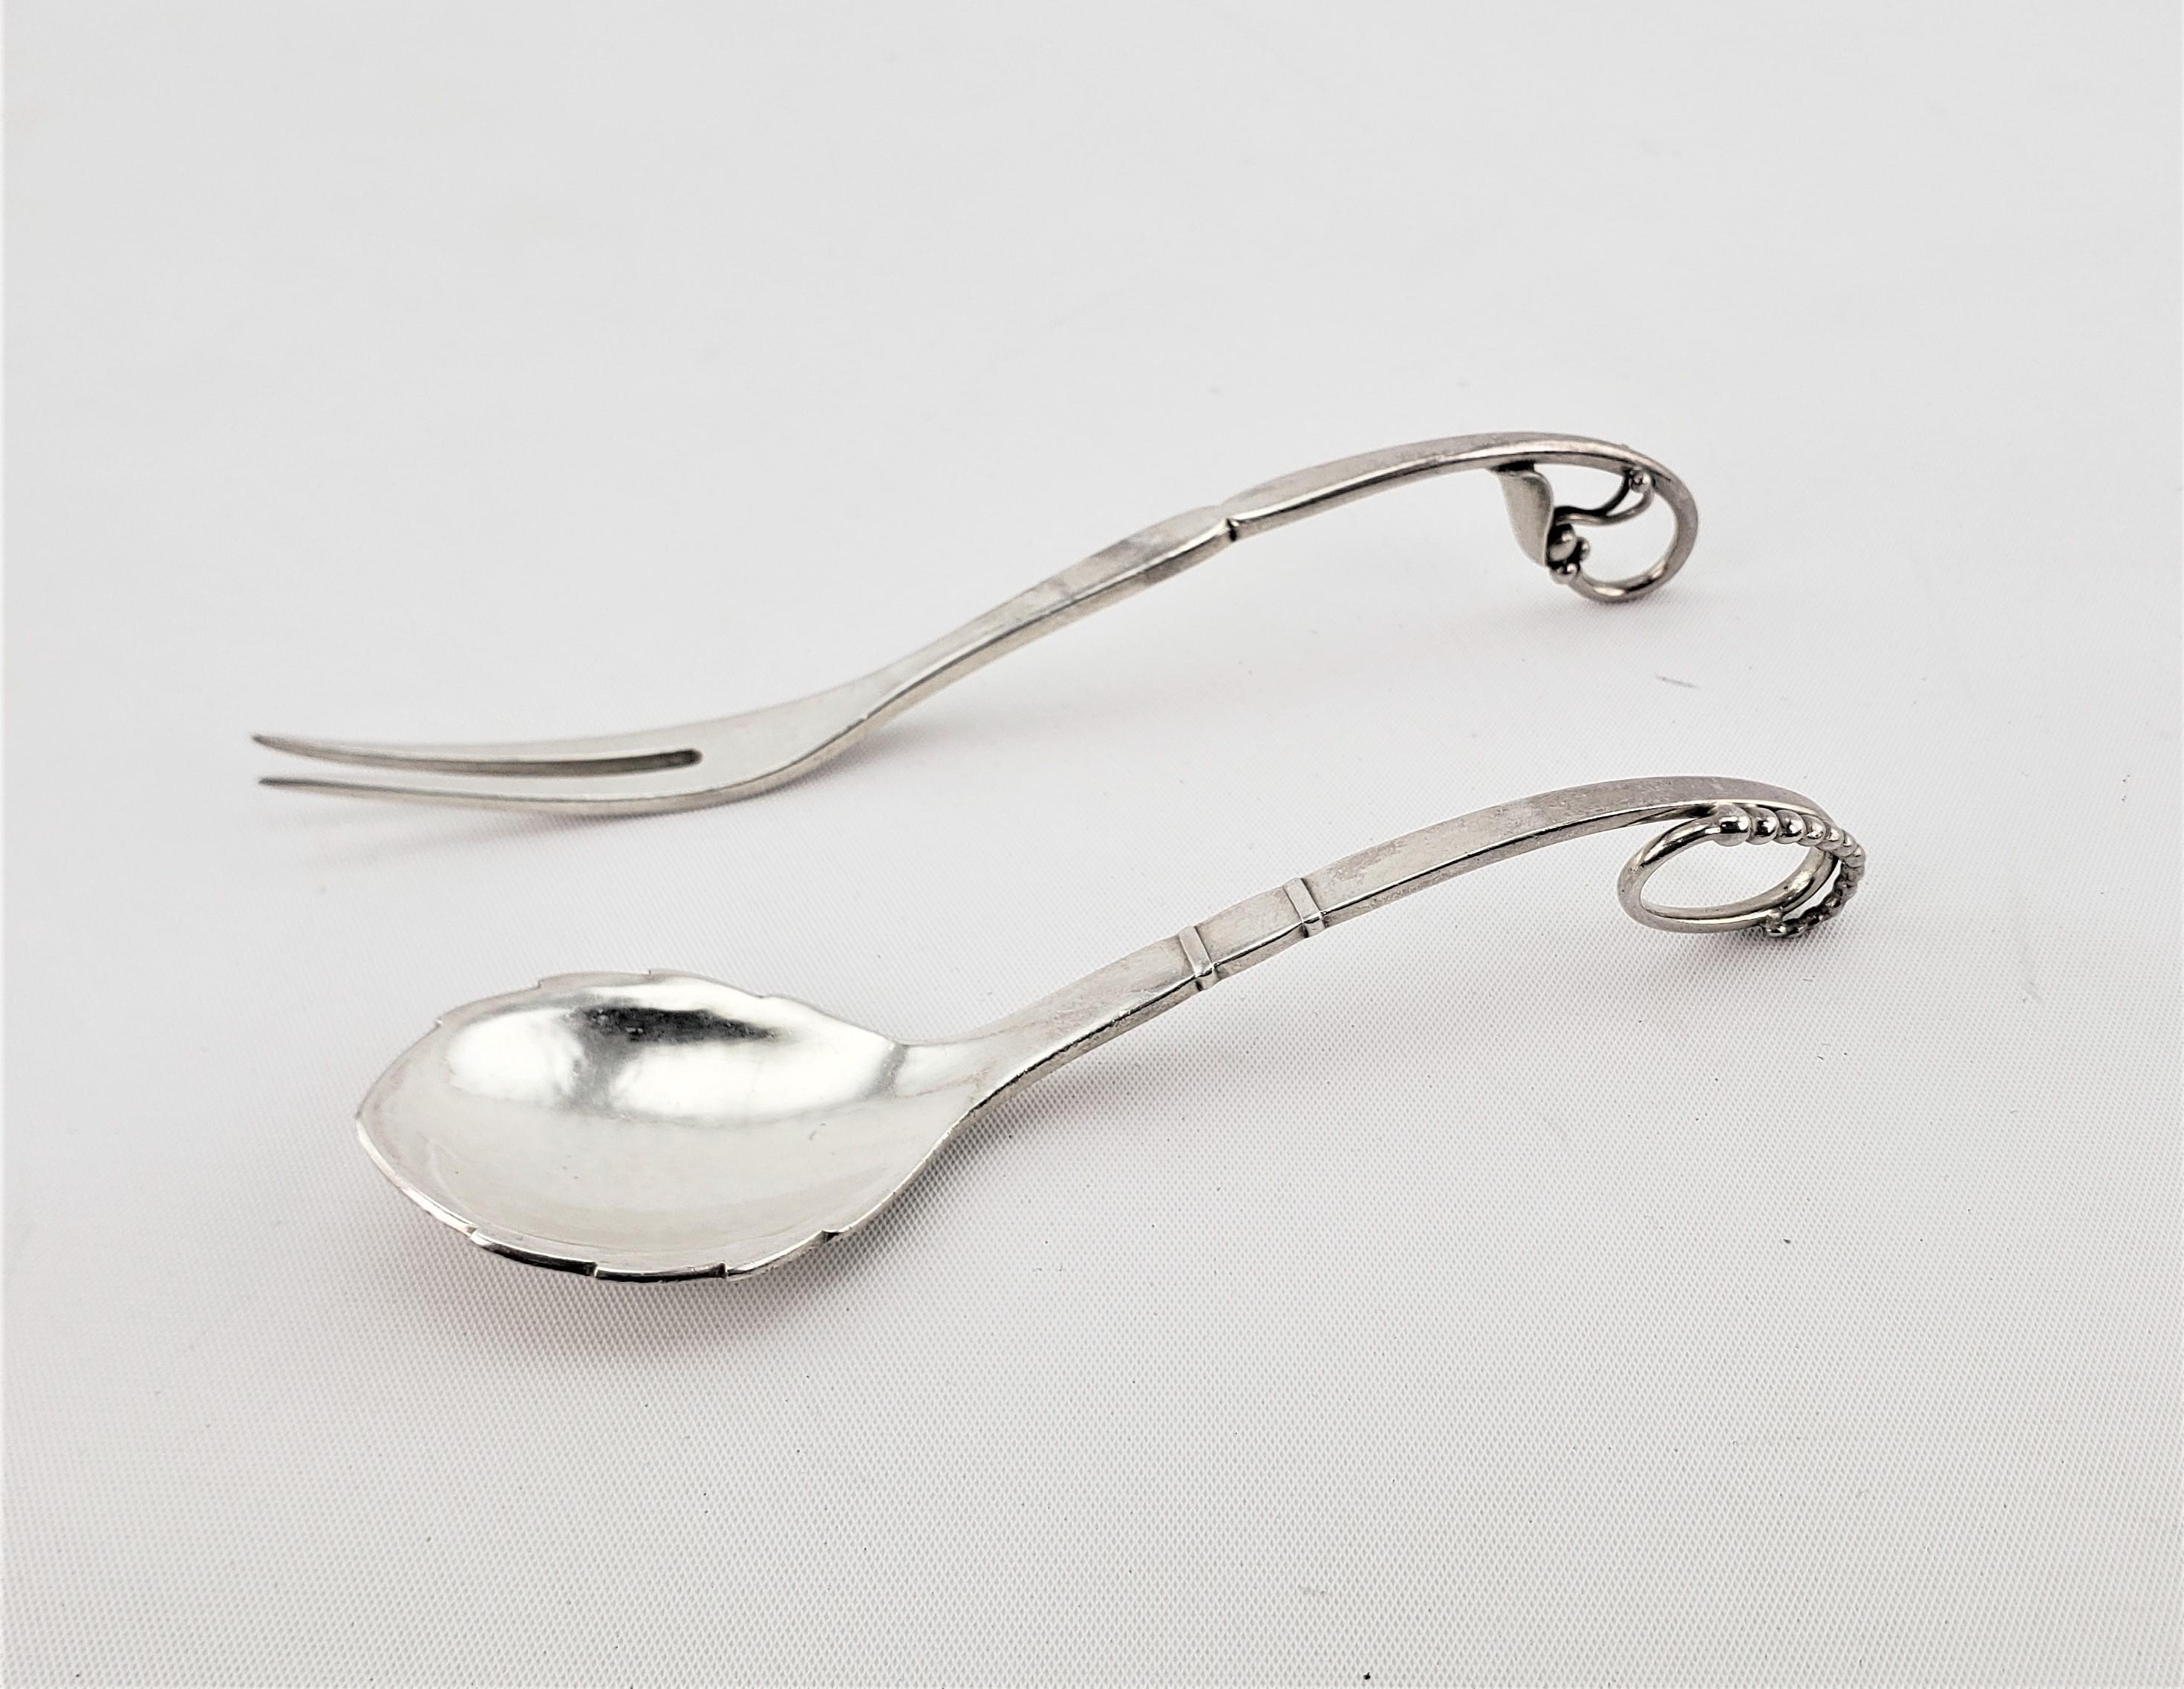 This sterling silver fork and knife set were made by the renowned Georg Jensen of Denmark in his Blossom pattern in a naturalistic or organic style. Both pieces are clearly hallmarked, and bear the maker's mark for Jensen G1 dating to approximately